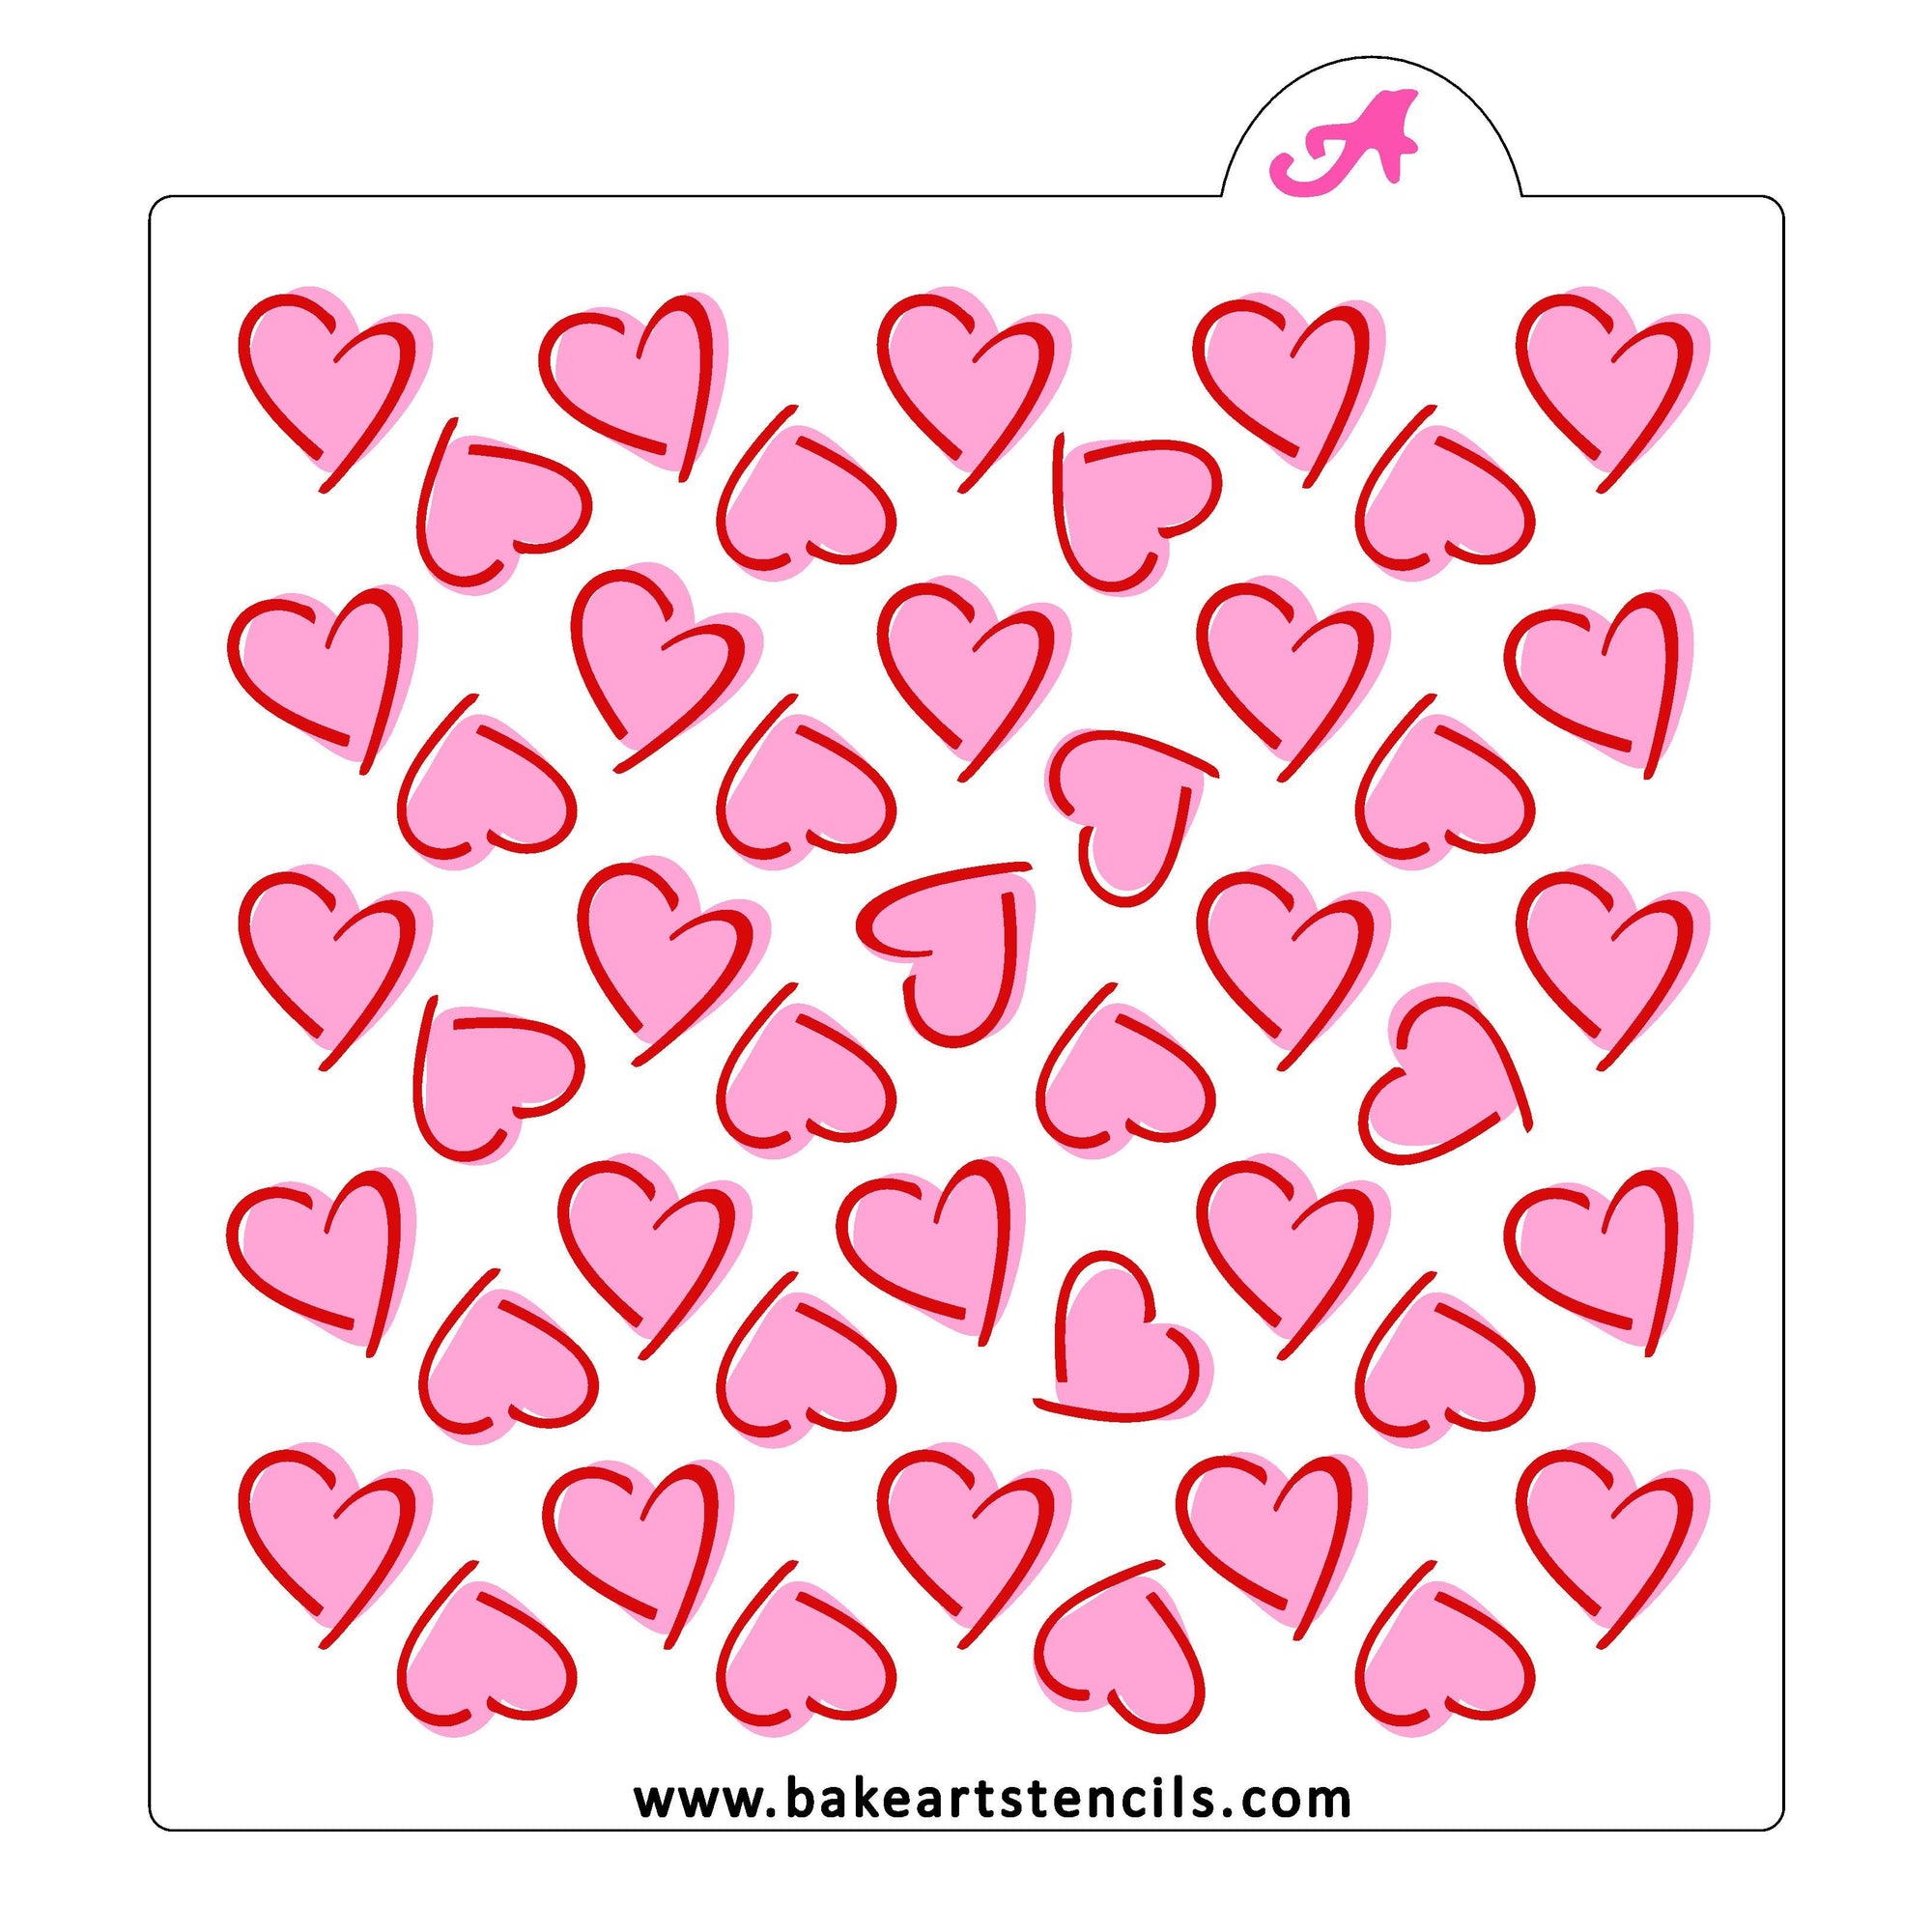 Emoji Heart Eyes Stencil Template - Reusable Stencils for Painting